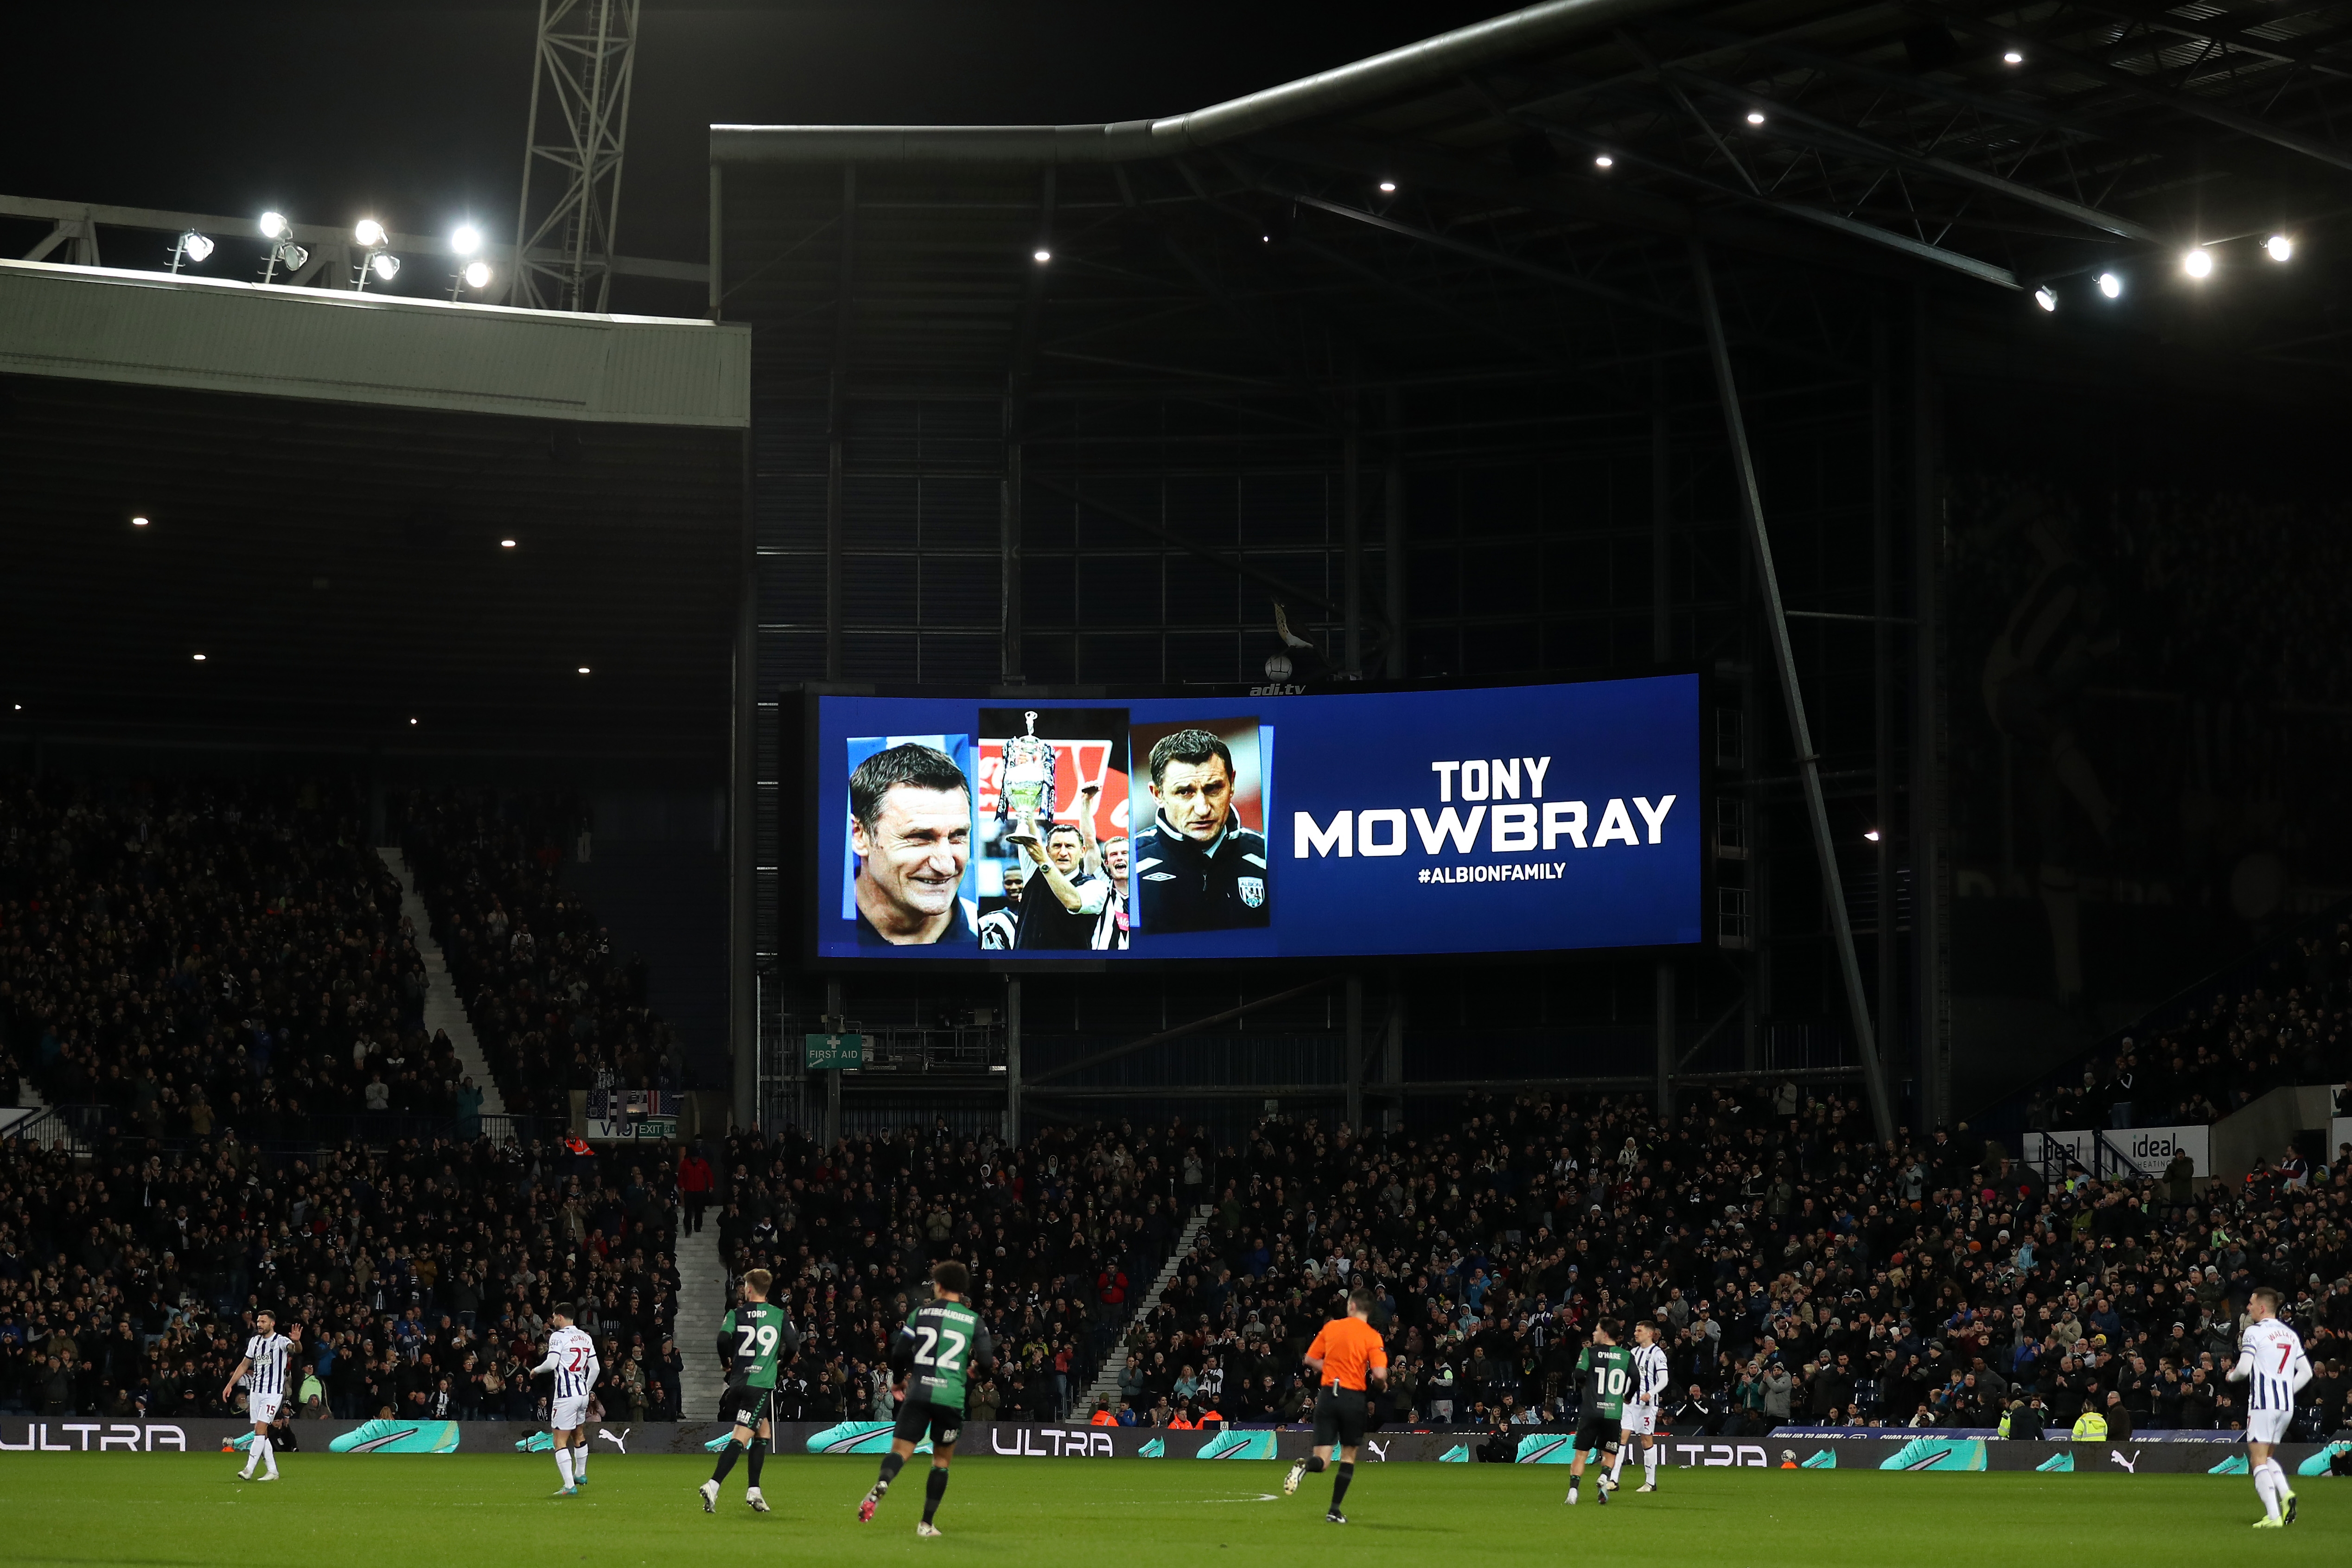 Tony Mowbray's picture up on the big screen at The Hawthorns in the 8th minute